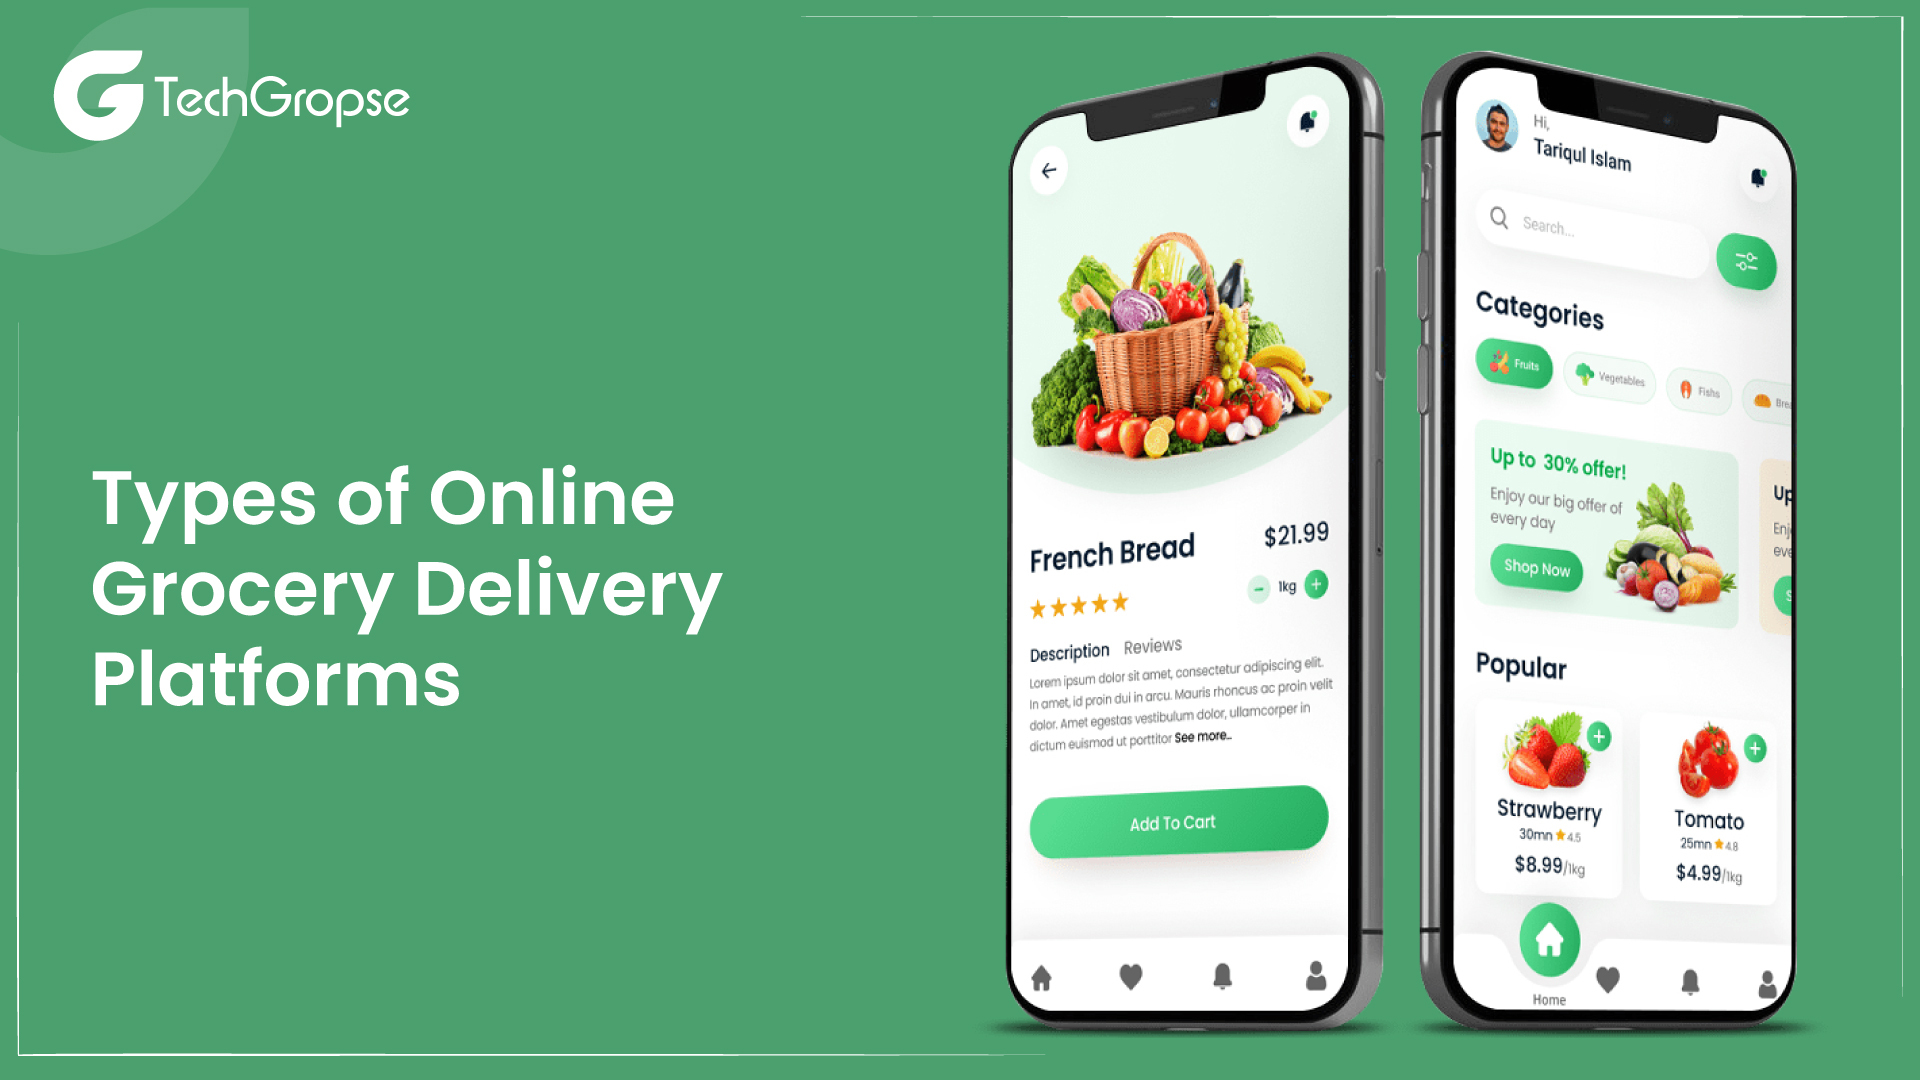 Types of Online Grocery Delivery Platforms